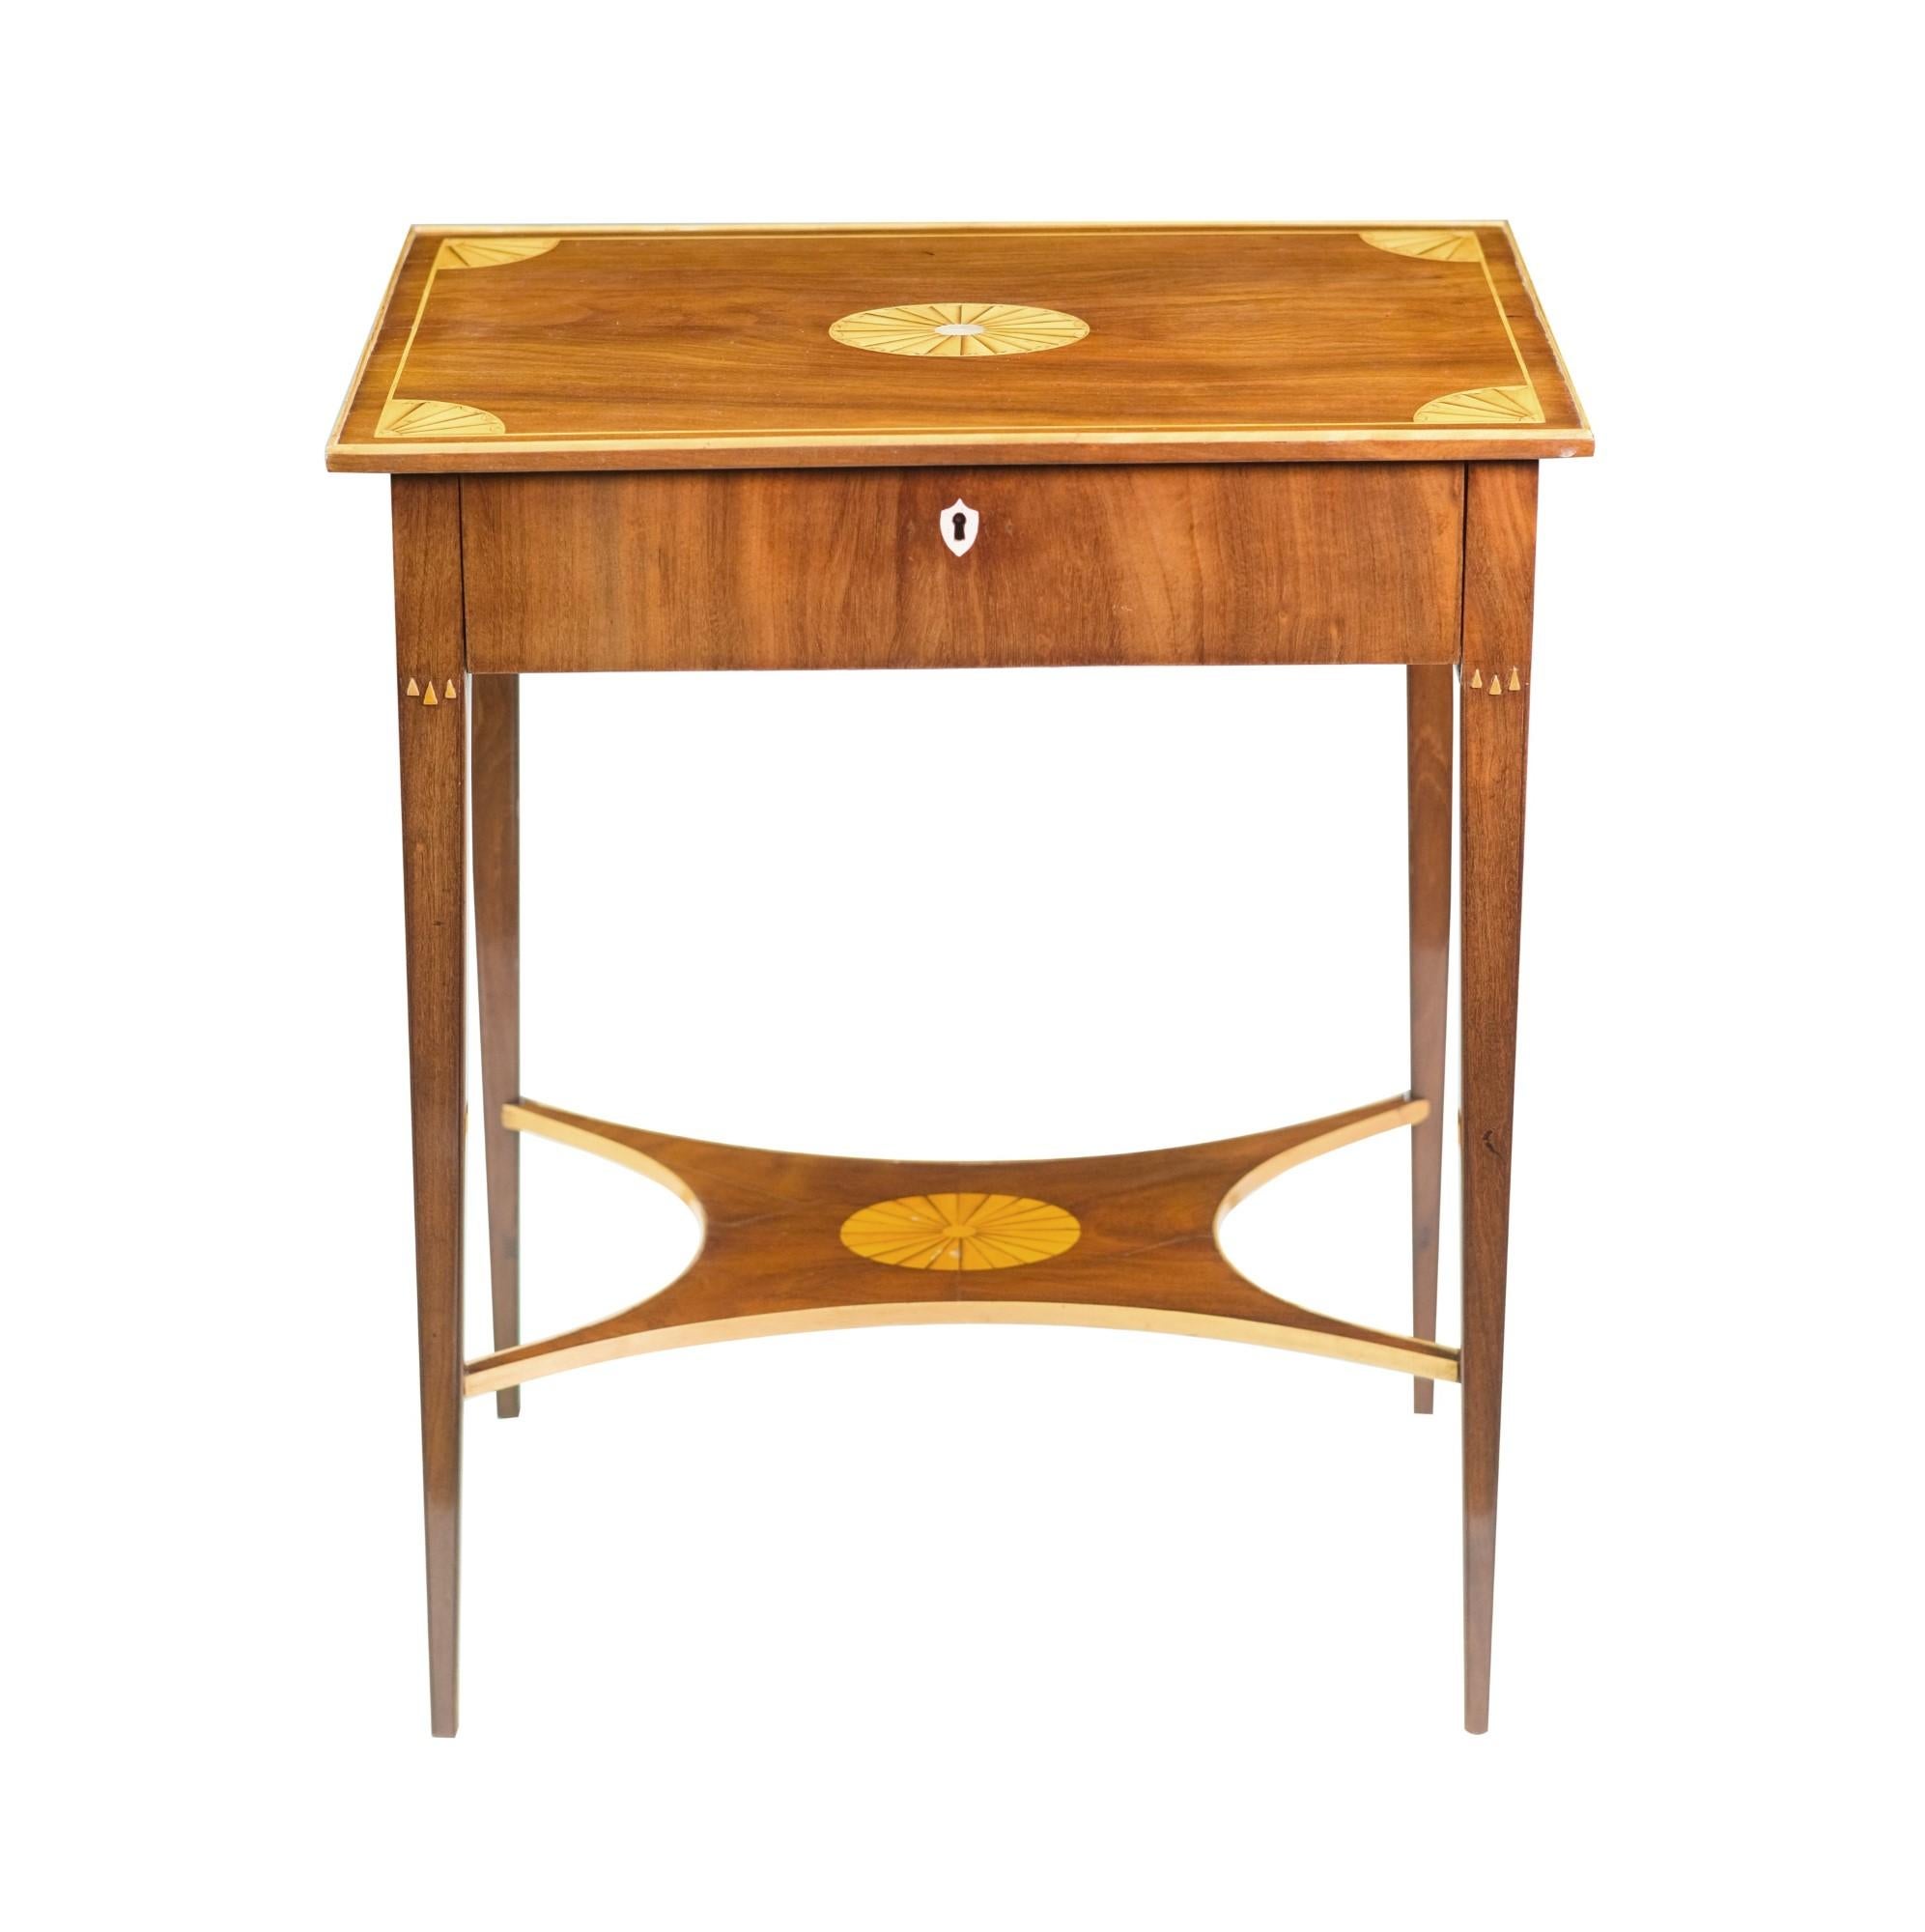 Antique Georgian style table made of a combination of mahogany and birch wood. It has a mother-of-pearl inlay on top and the drawer has 8 small compartments and 3 small drawers. The Key for the drawer is also included. This can be seen at our 400